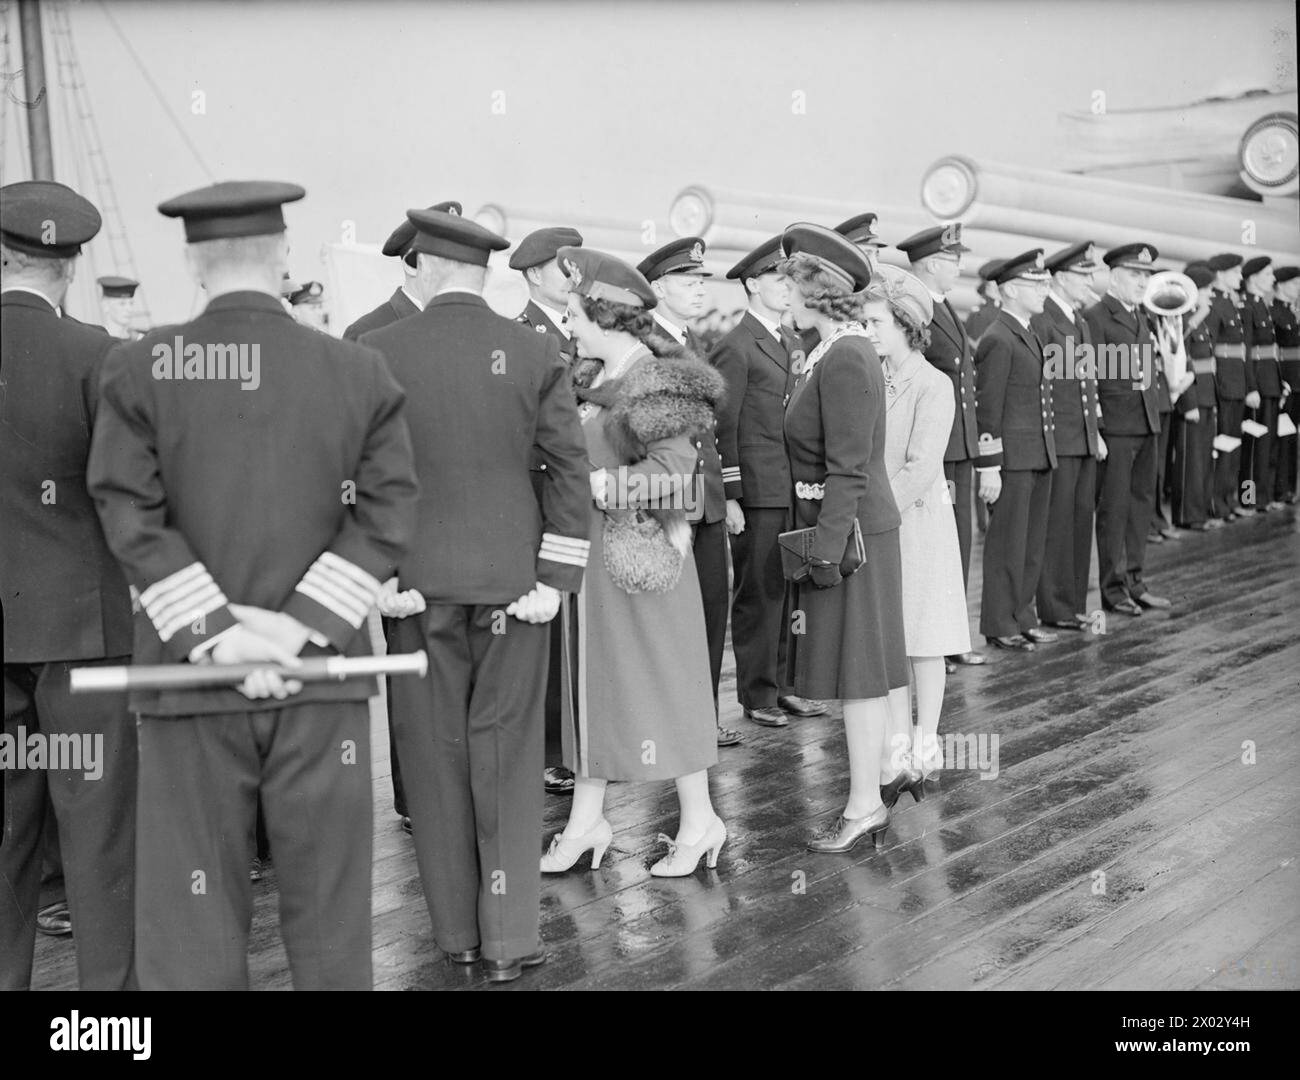 ROYAL VISIT TO HMS KING GEORGE V. 29 OCTOBER 1944, GREENOCK. THE KING AND QUEEN ACCOMPANIED BY PRINCESS ELIZABETH AND PRINCESS MARGARET PAID A FAREWELL VISIT TO THE BATTLESHIP HMS KING GEORGE V BEFORE SHE LEFT TO JOIN BRITAIN'S EAST INDIES FLEET. - The Queen and the Princesses meeting ship's officers on the quarterdeck Stock Photo